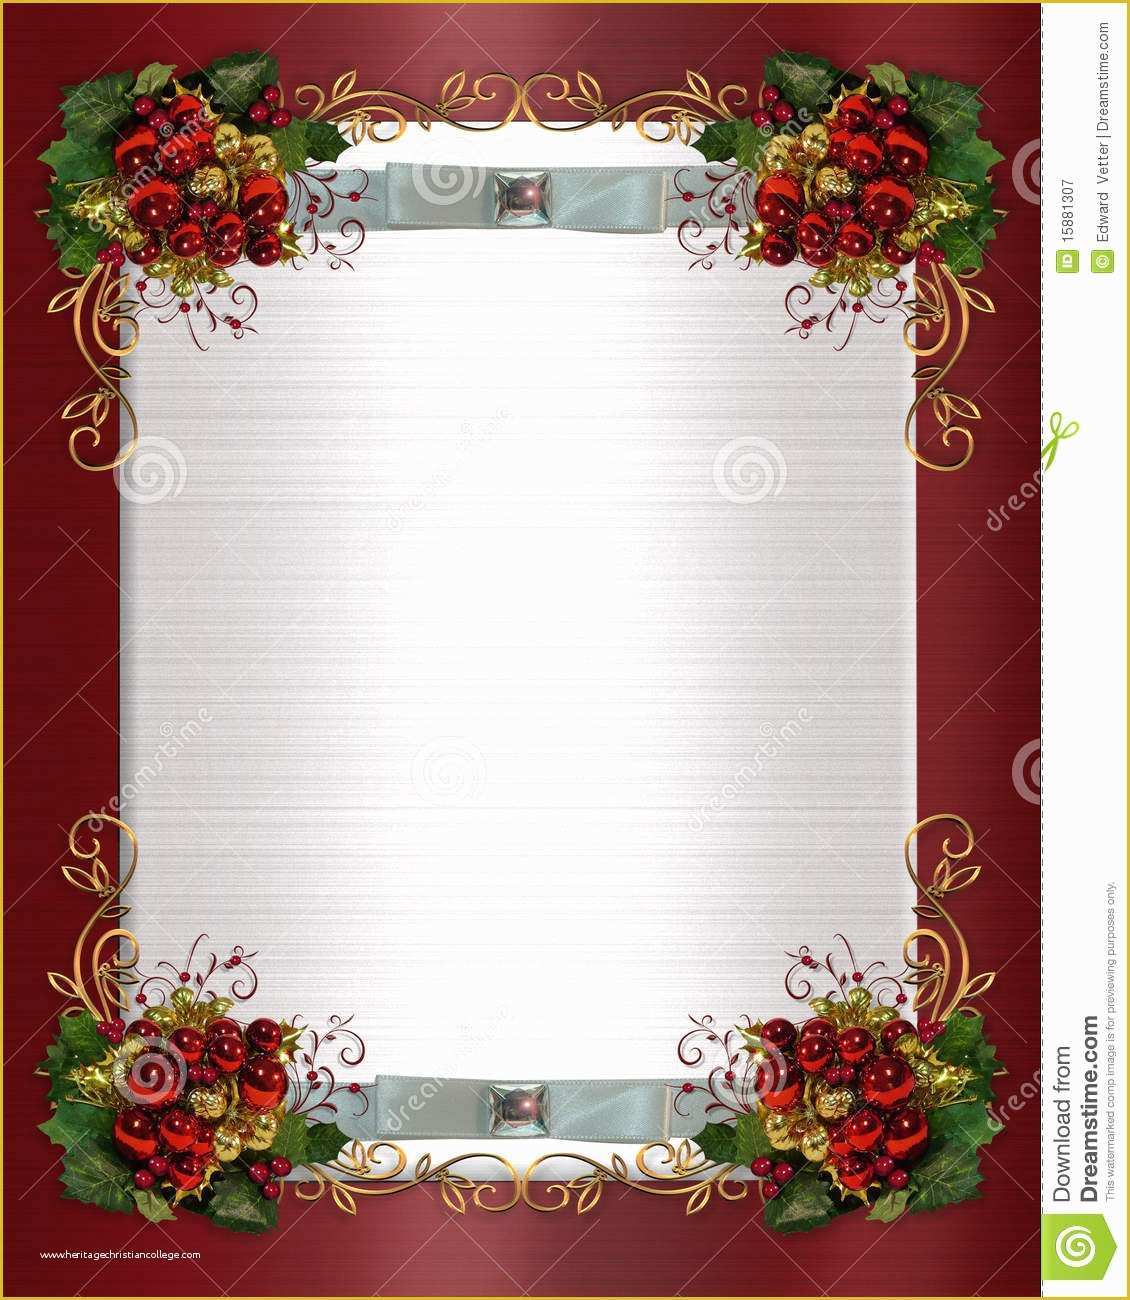 Christmas Cards Templates Free Downloads Of Christmas Party Invitation Templates Free Download